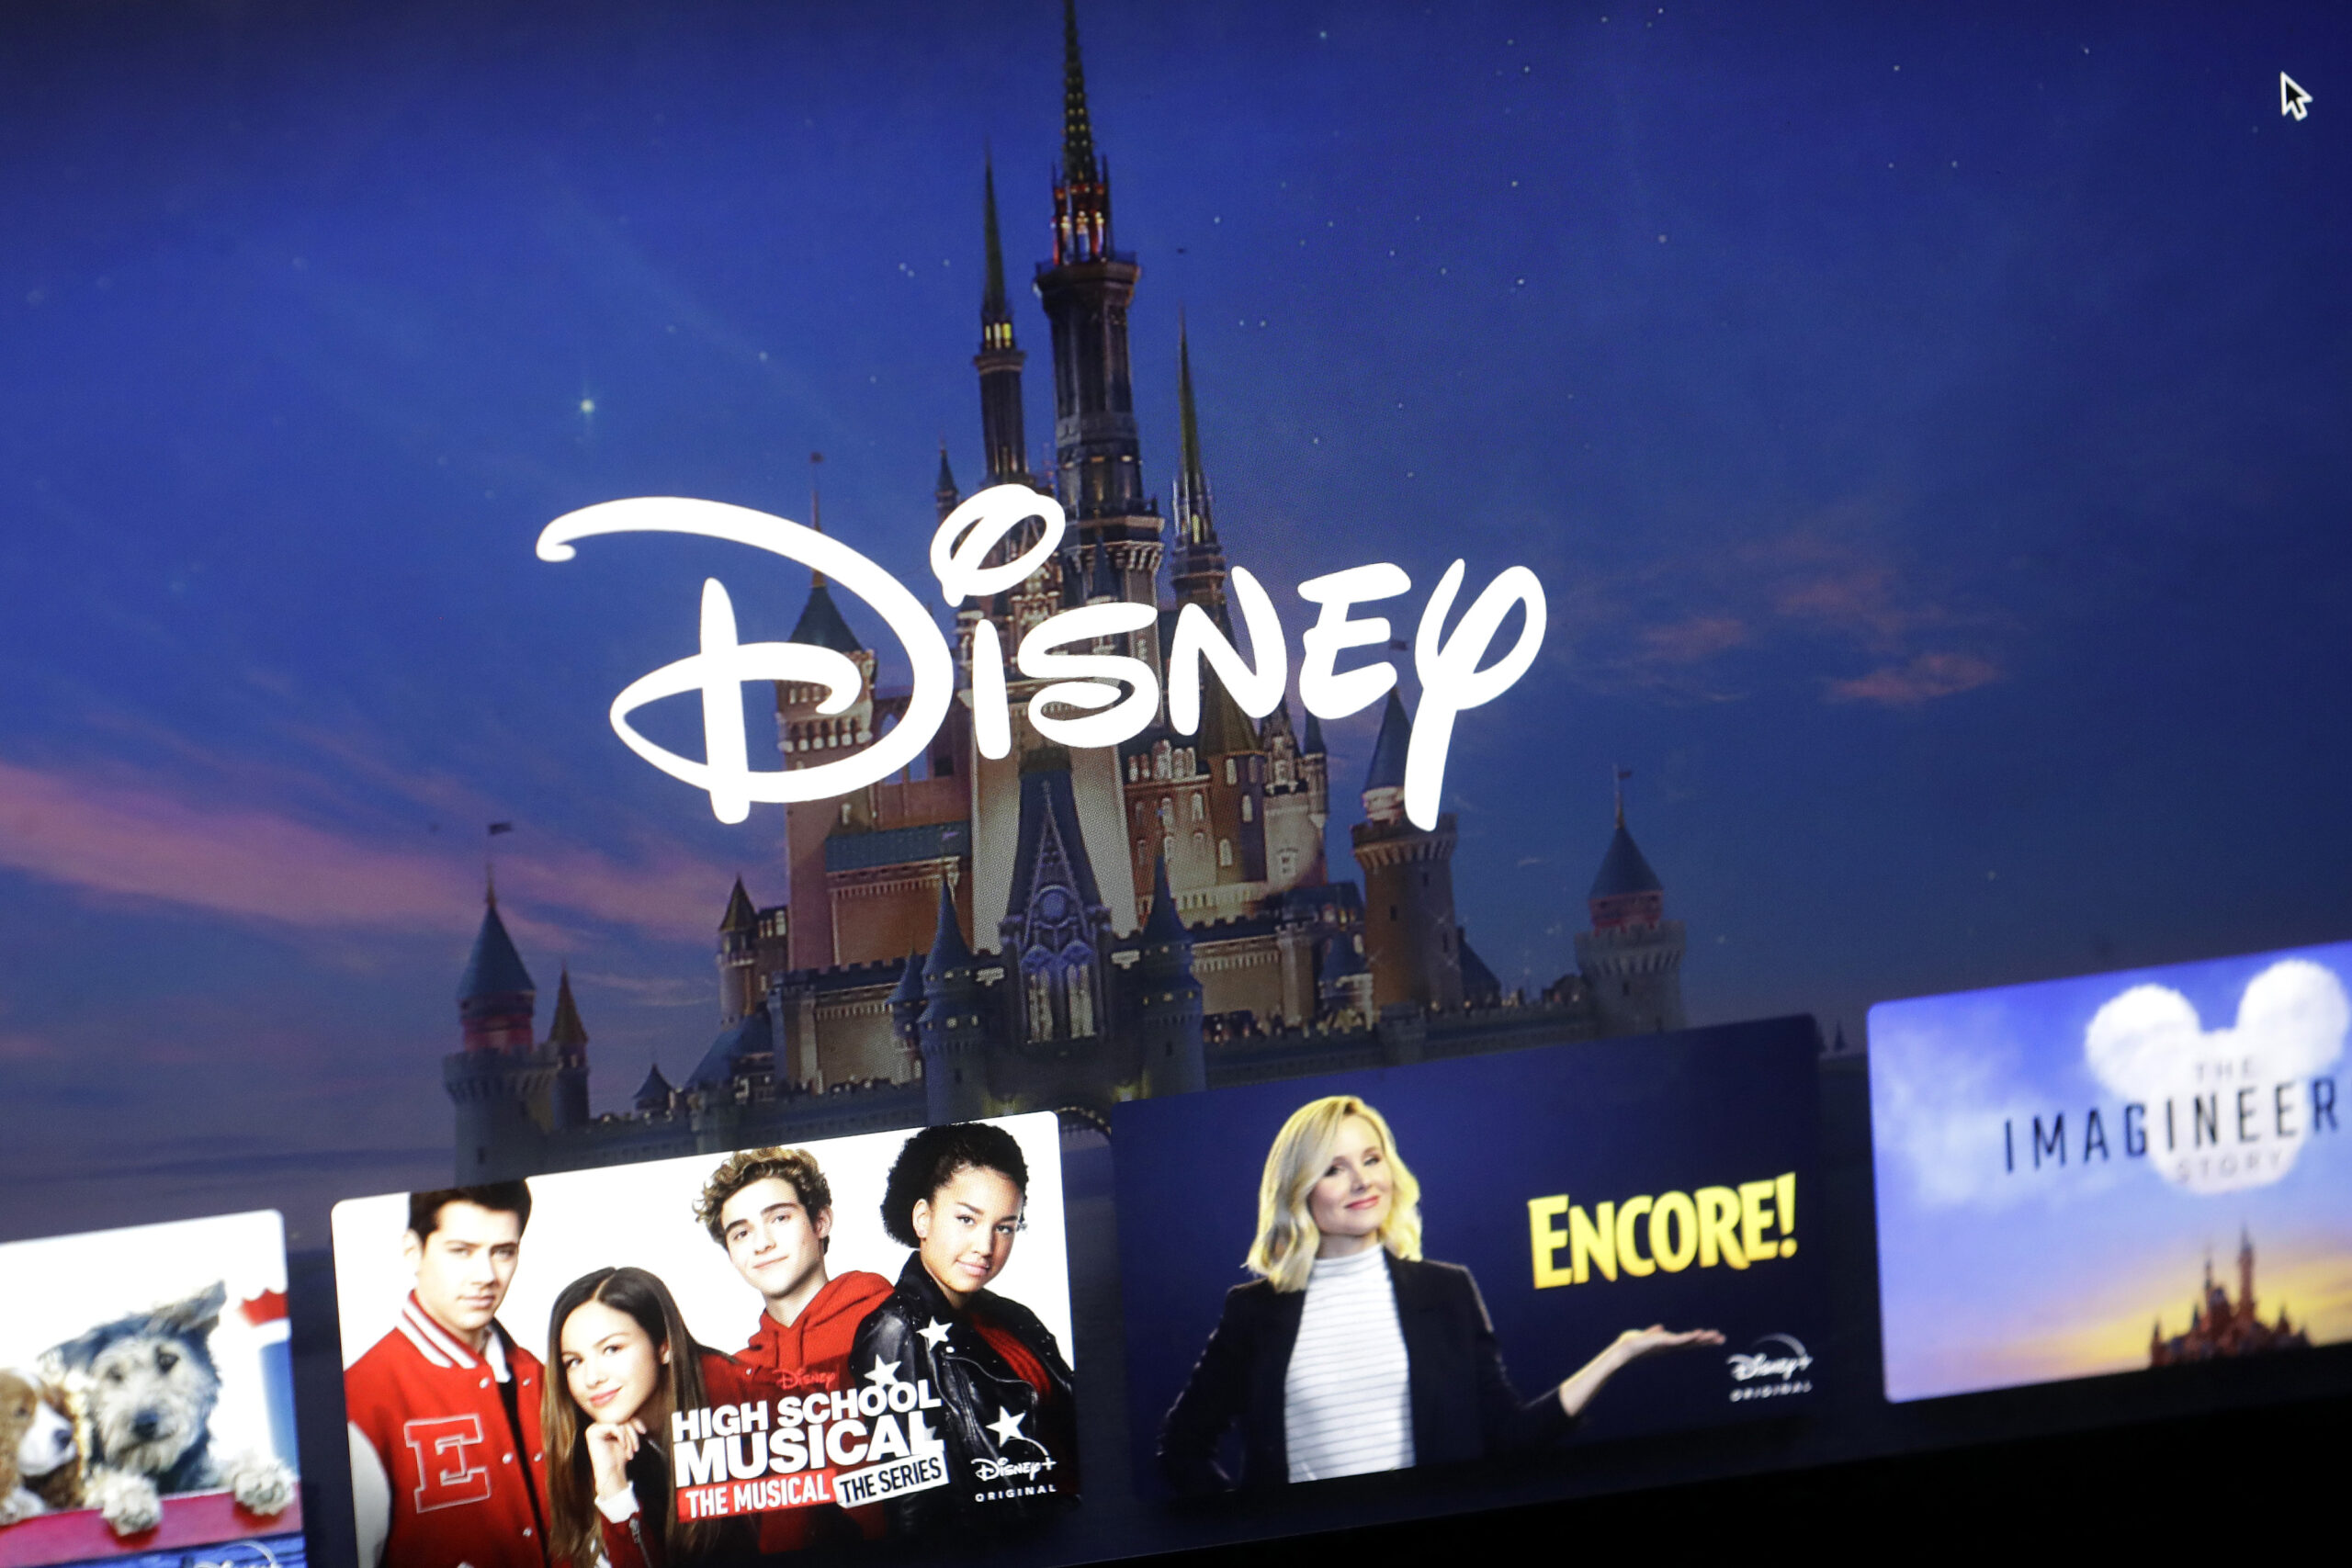 A Disney logo forms part of a menu for the Disney Plus movie and entertainment streaming service